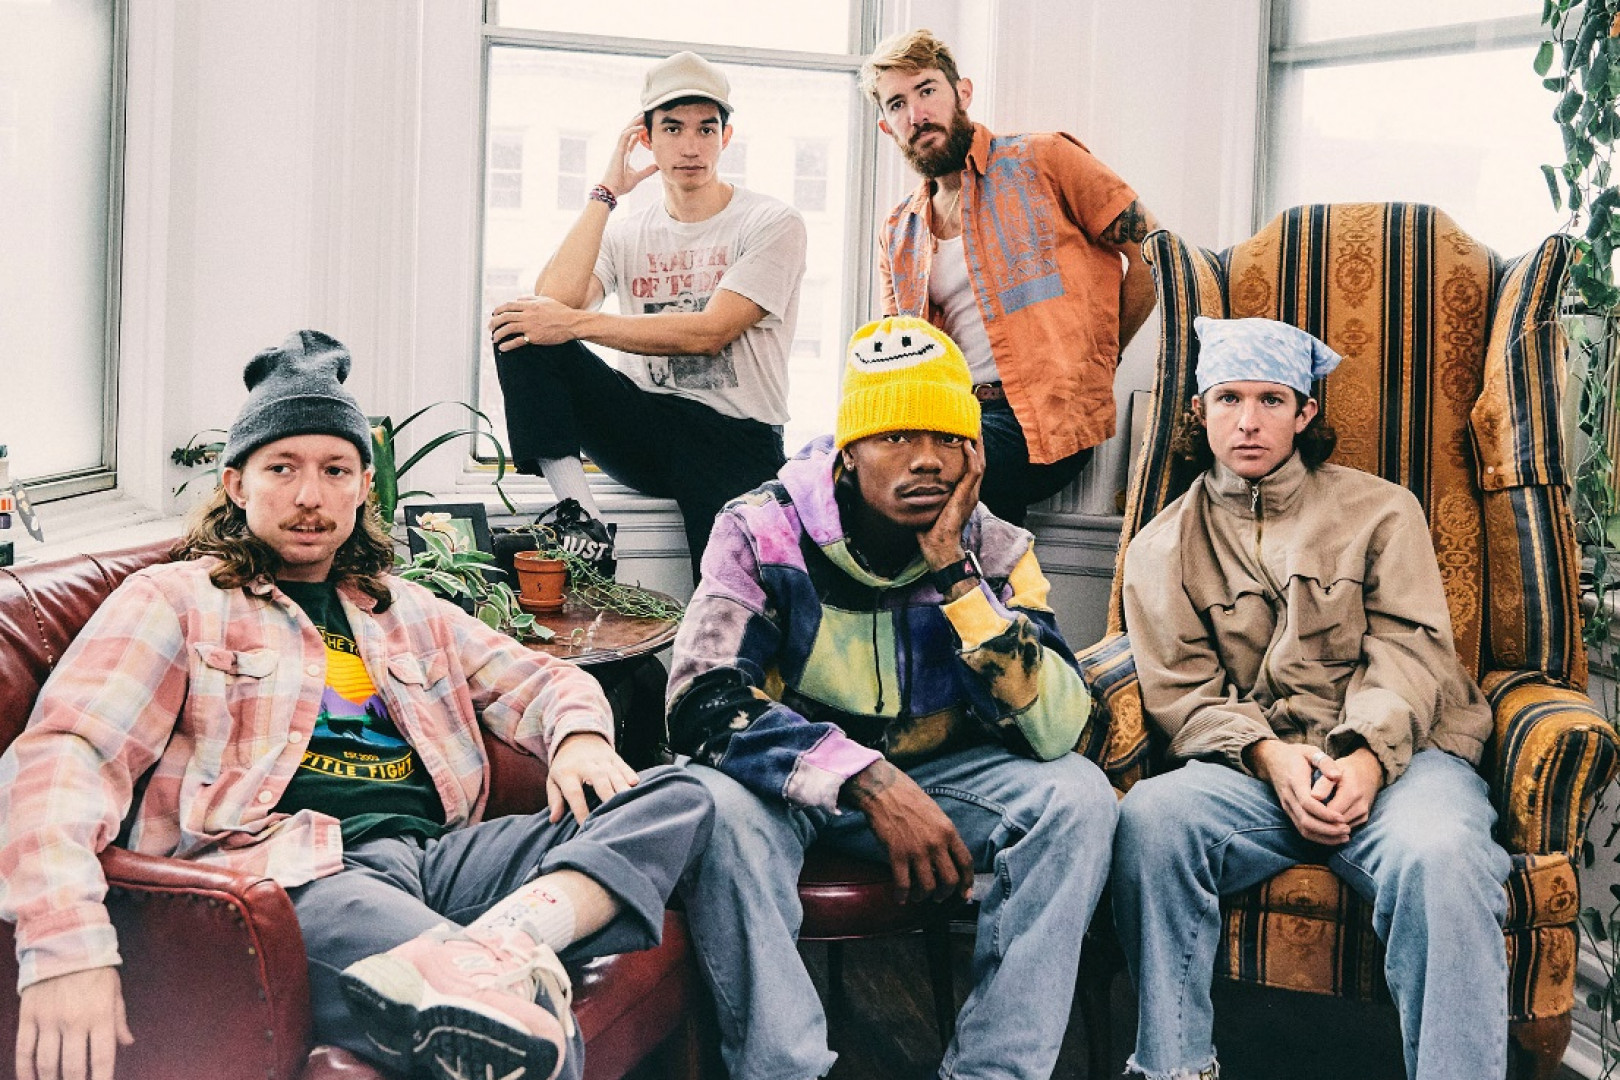 Turnstile officially part ways with guitarist and co-founder Brady Ebert